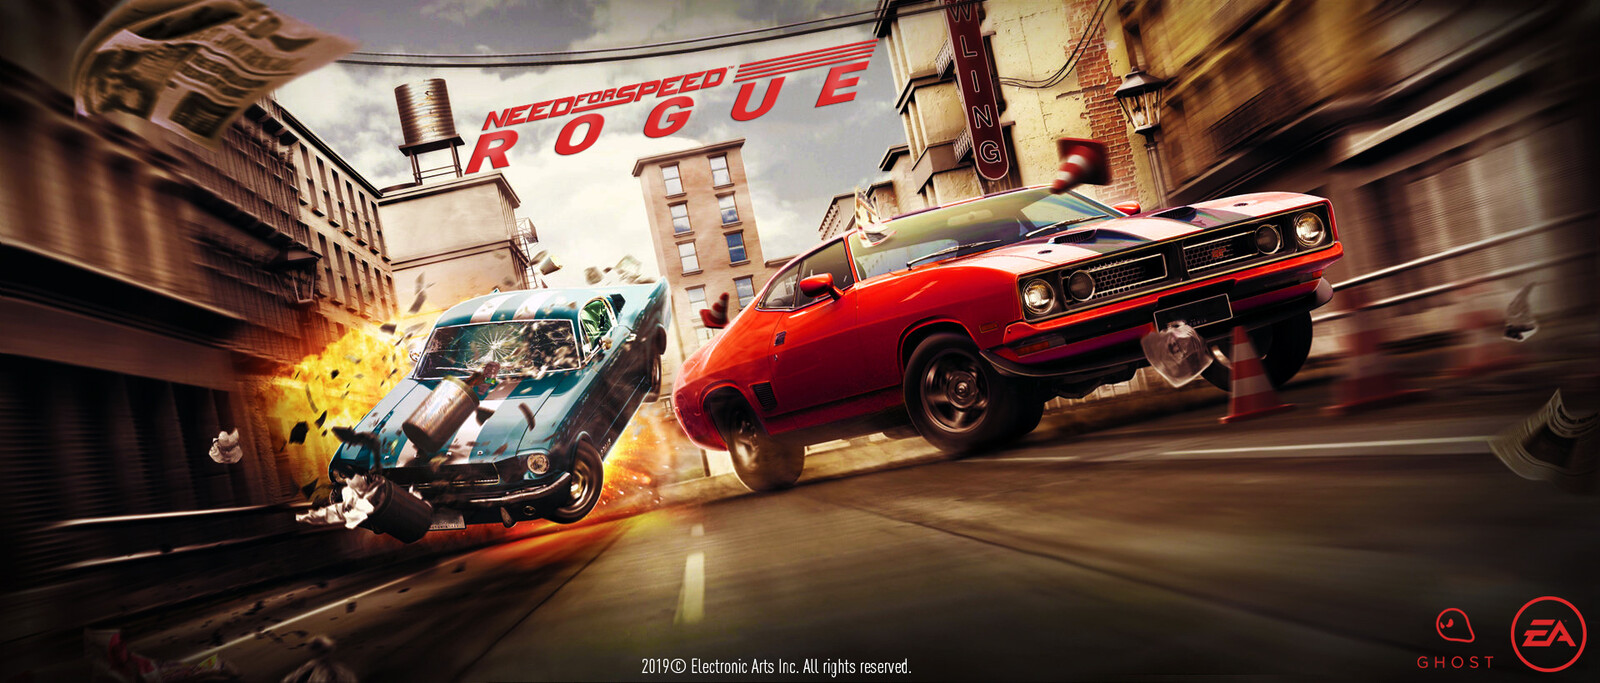 Need for Speed Rogue (Americana-styled splash screen)